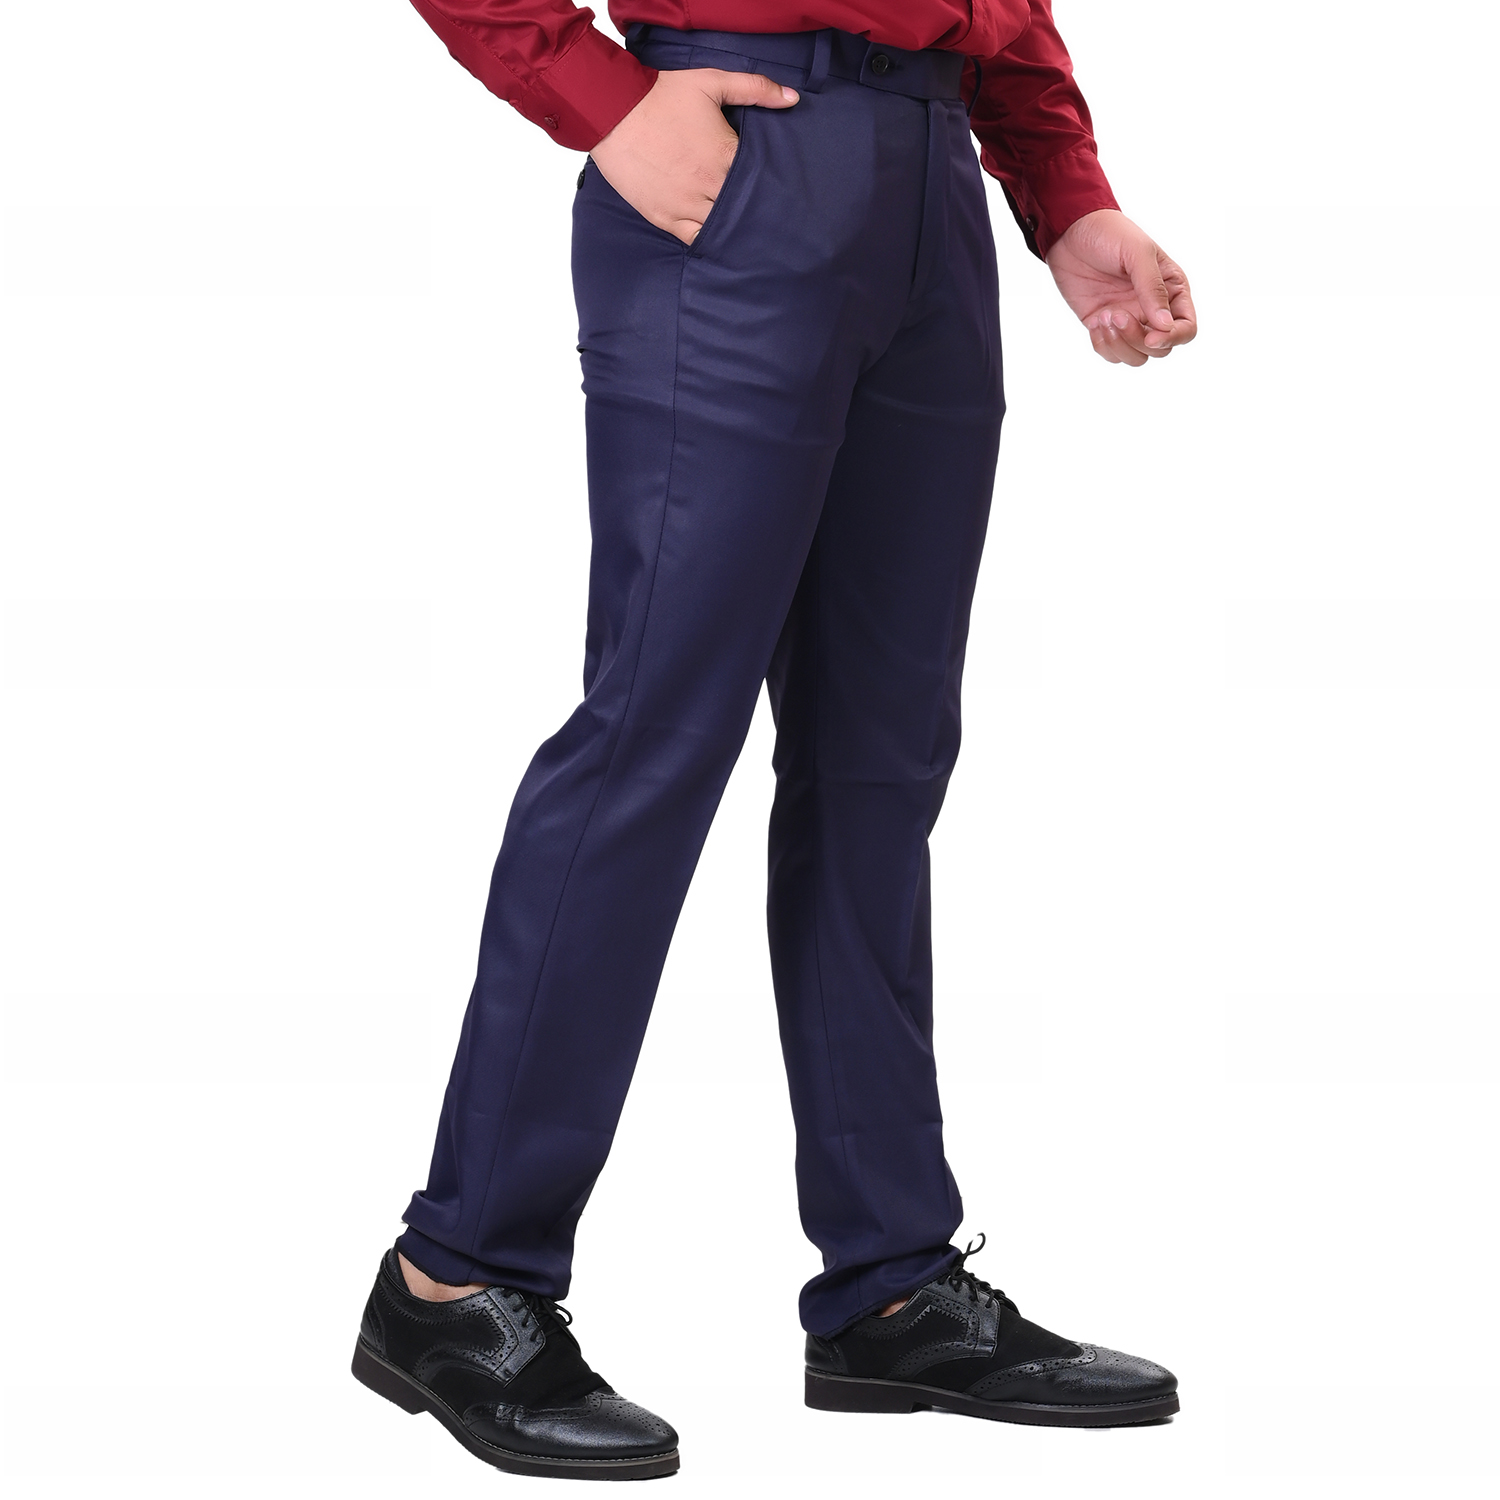 Buy Unique Lifestyle Slim Fit Formal Trousers/Pant for Men. Navy Blue (28)  at Amazon.in